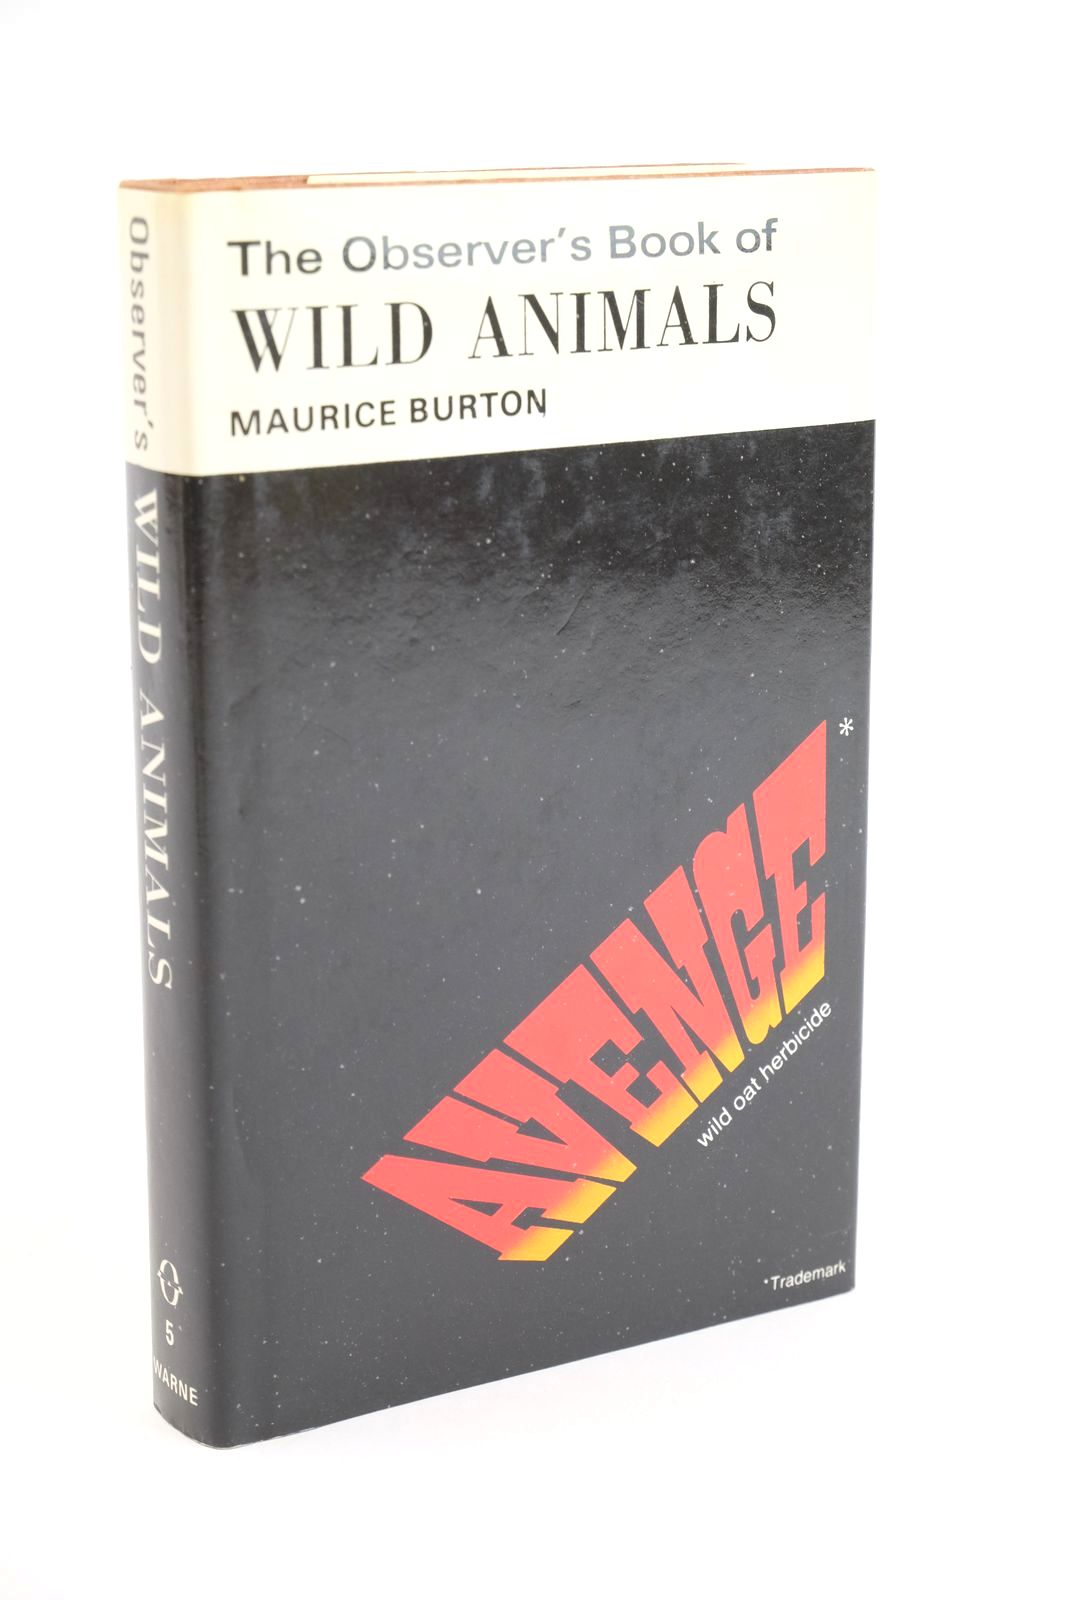 Photo of THE OBSERVER'S BOOK OF WILD ANIMALS (CYANAMID WRAPPER) written by Burton, Maurice published by Frederick Warne &amp; Co Ltd. (STOCK CODE: 1323652)  for sale by Stella & Rose's Books